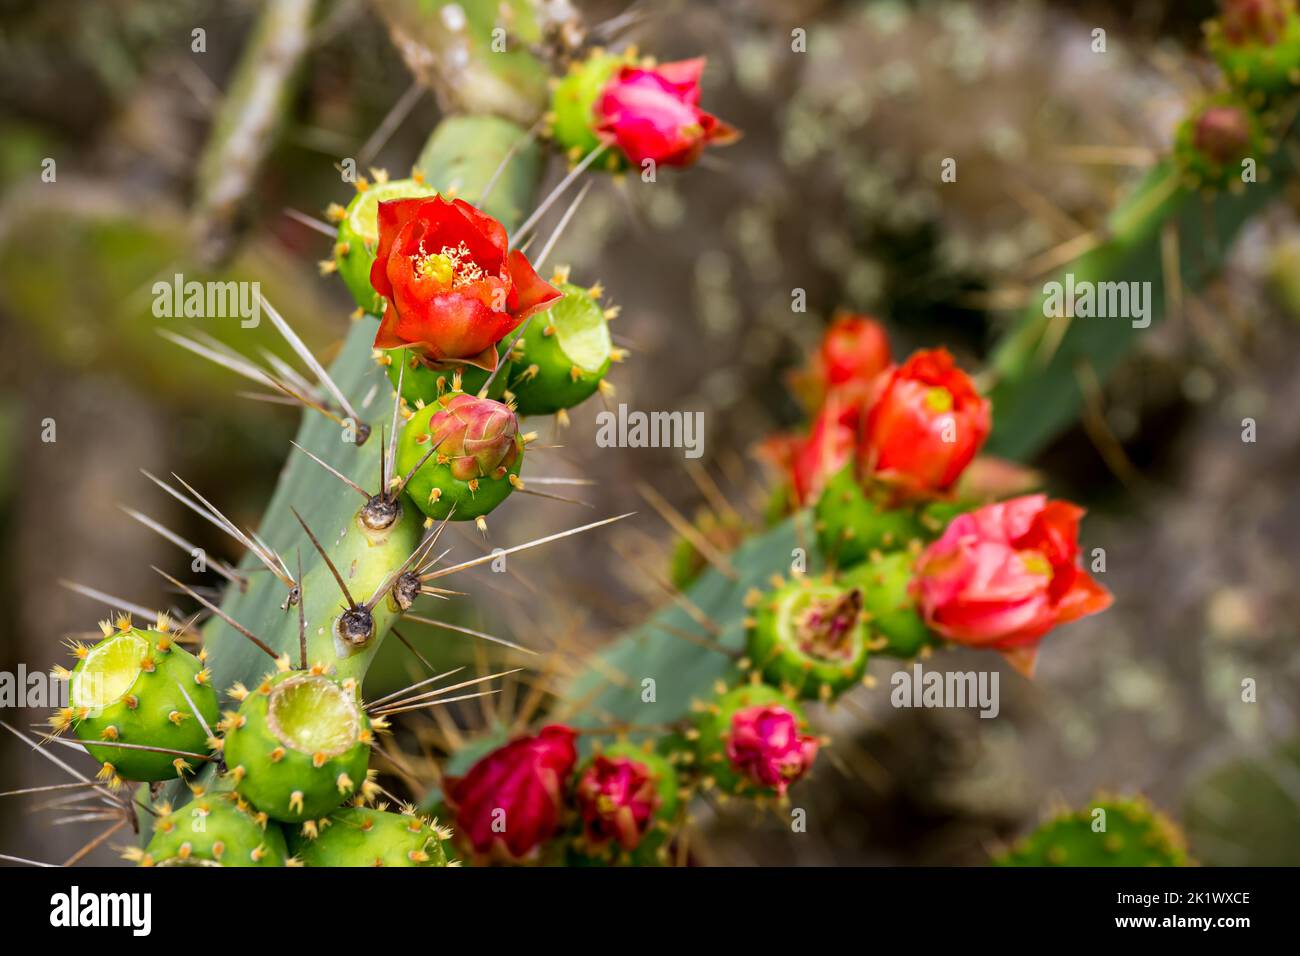 Closeup of prickly pear cactus flower (lat. Opuntia) with red petals and yellow stamen growing next to green unripe prickly pear fruits and big spikes. Stock Photo